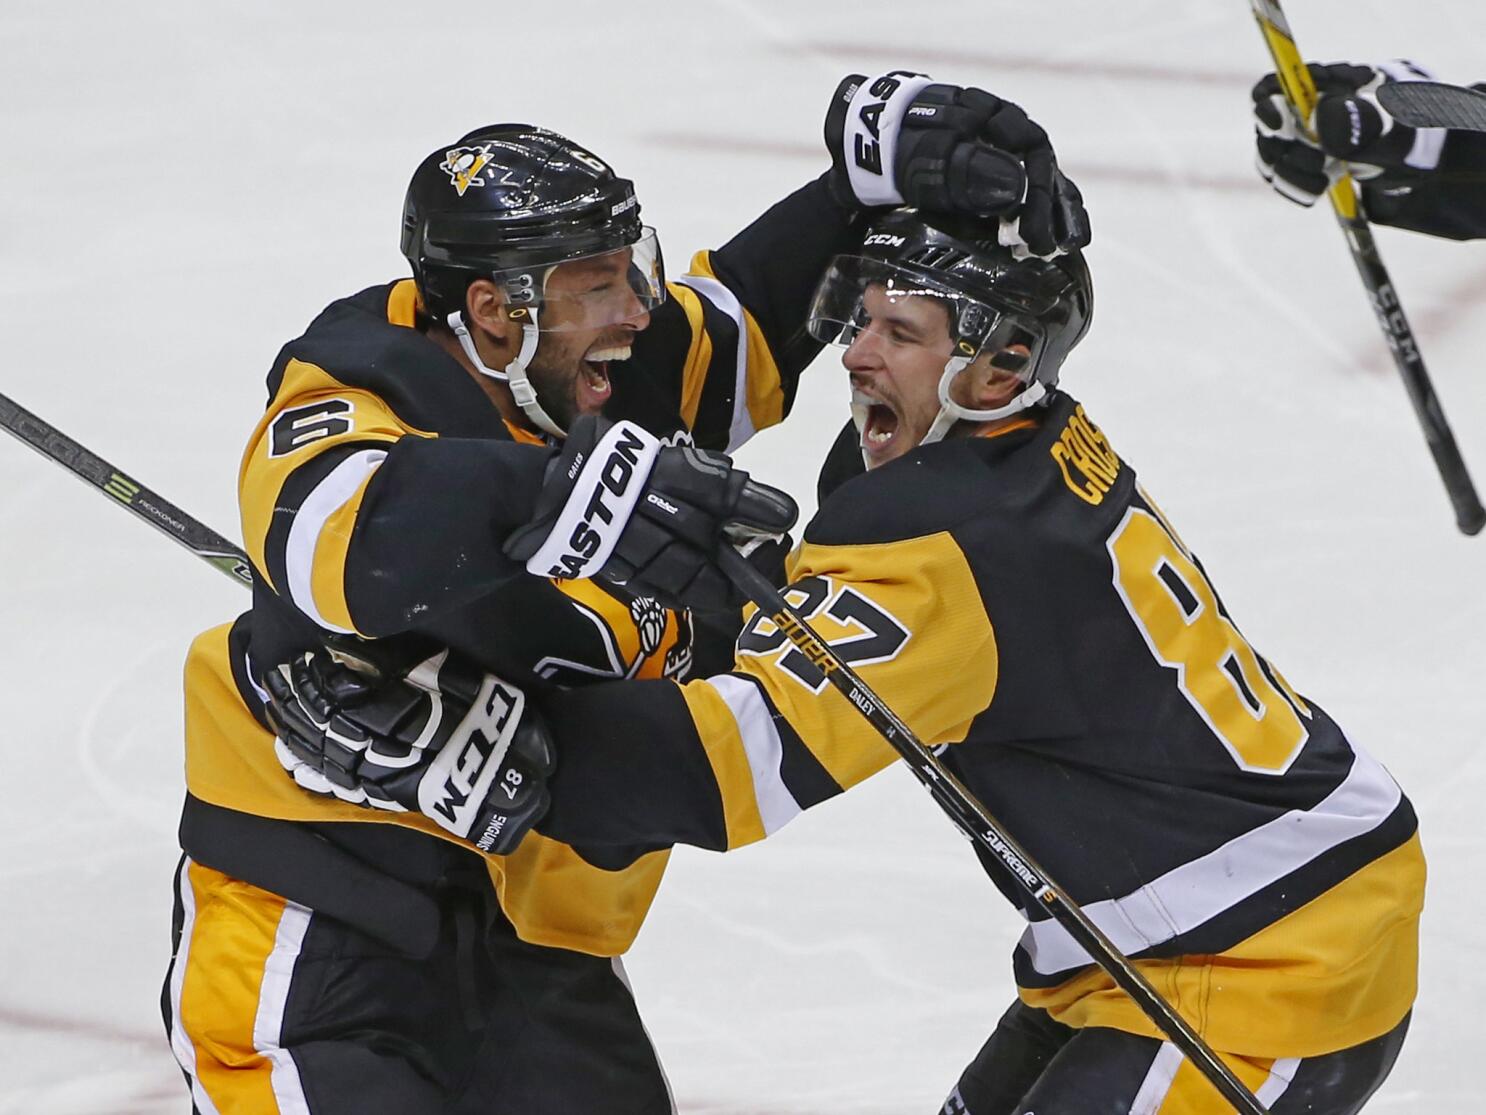 Rust scores twice, Penguins pull away from Capitals 6-3 - The San